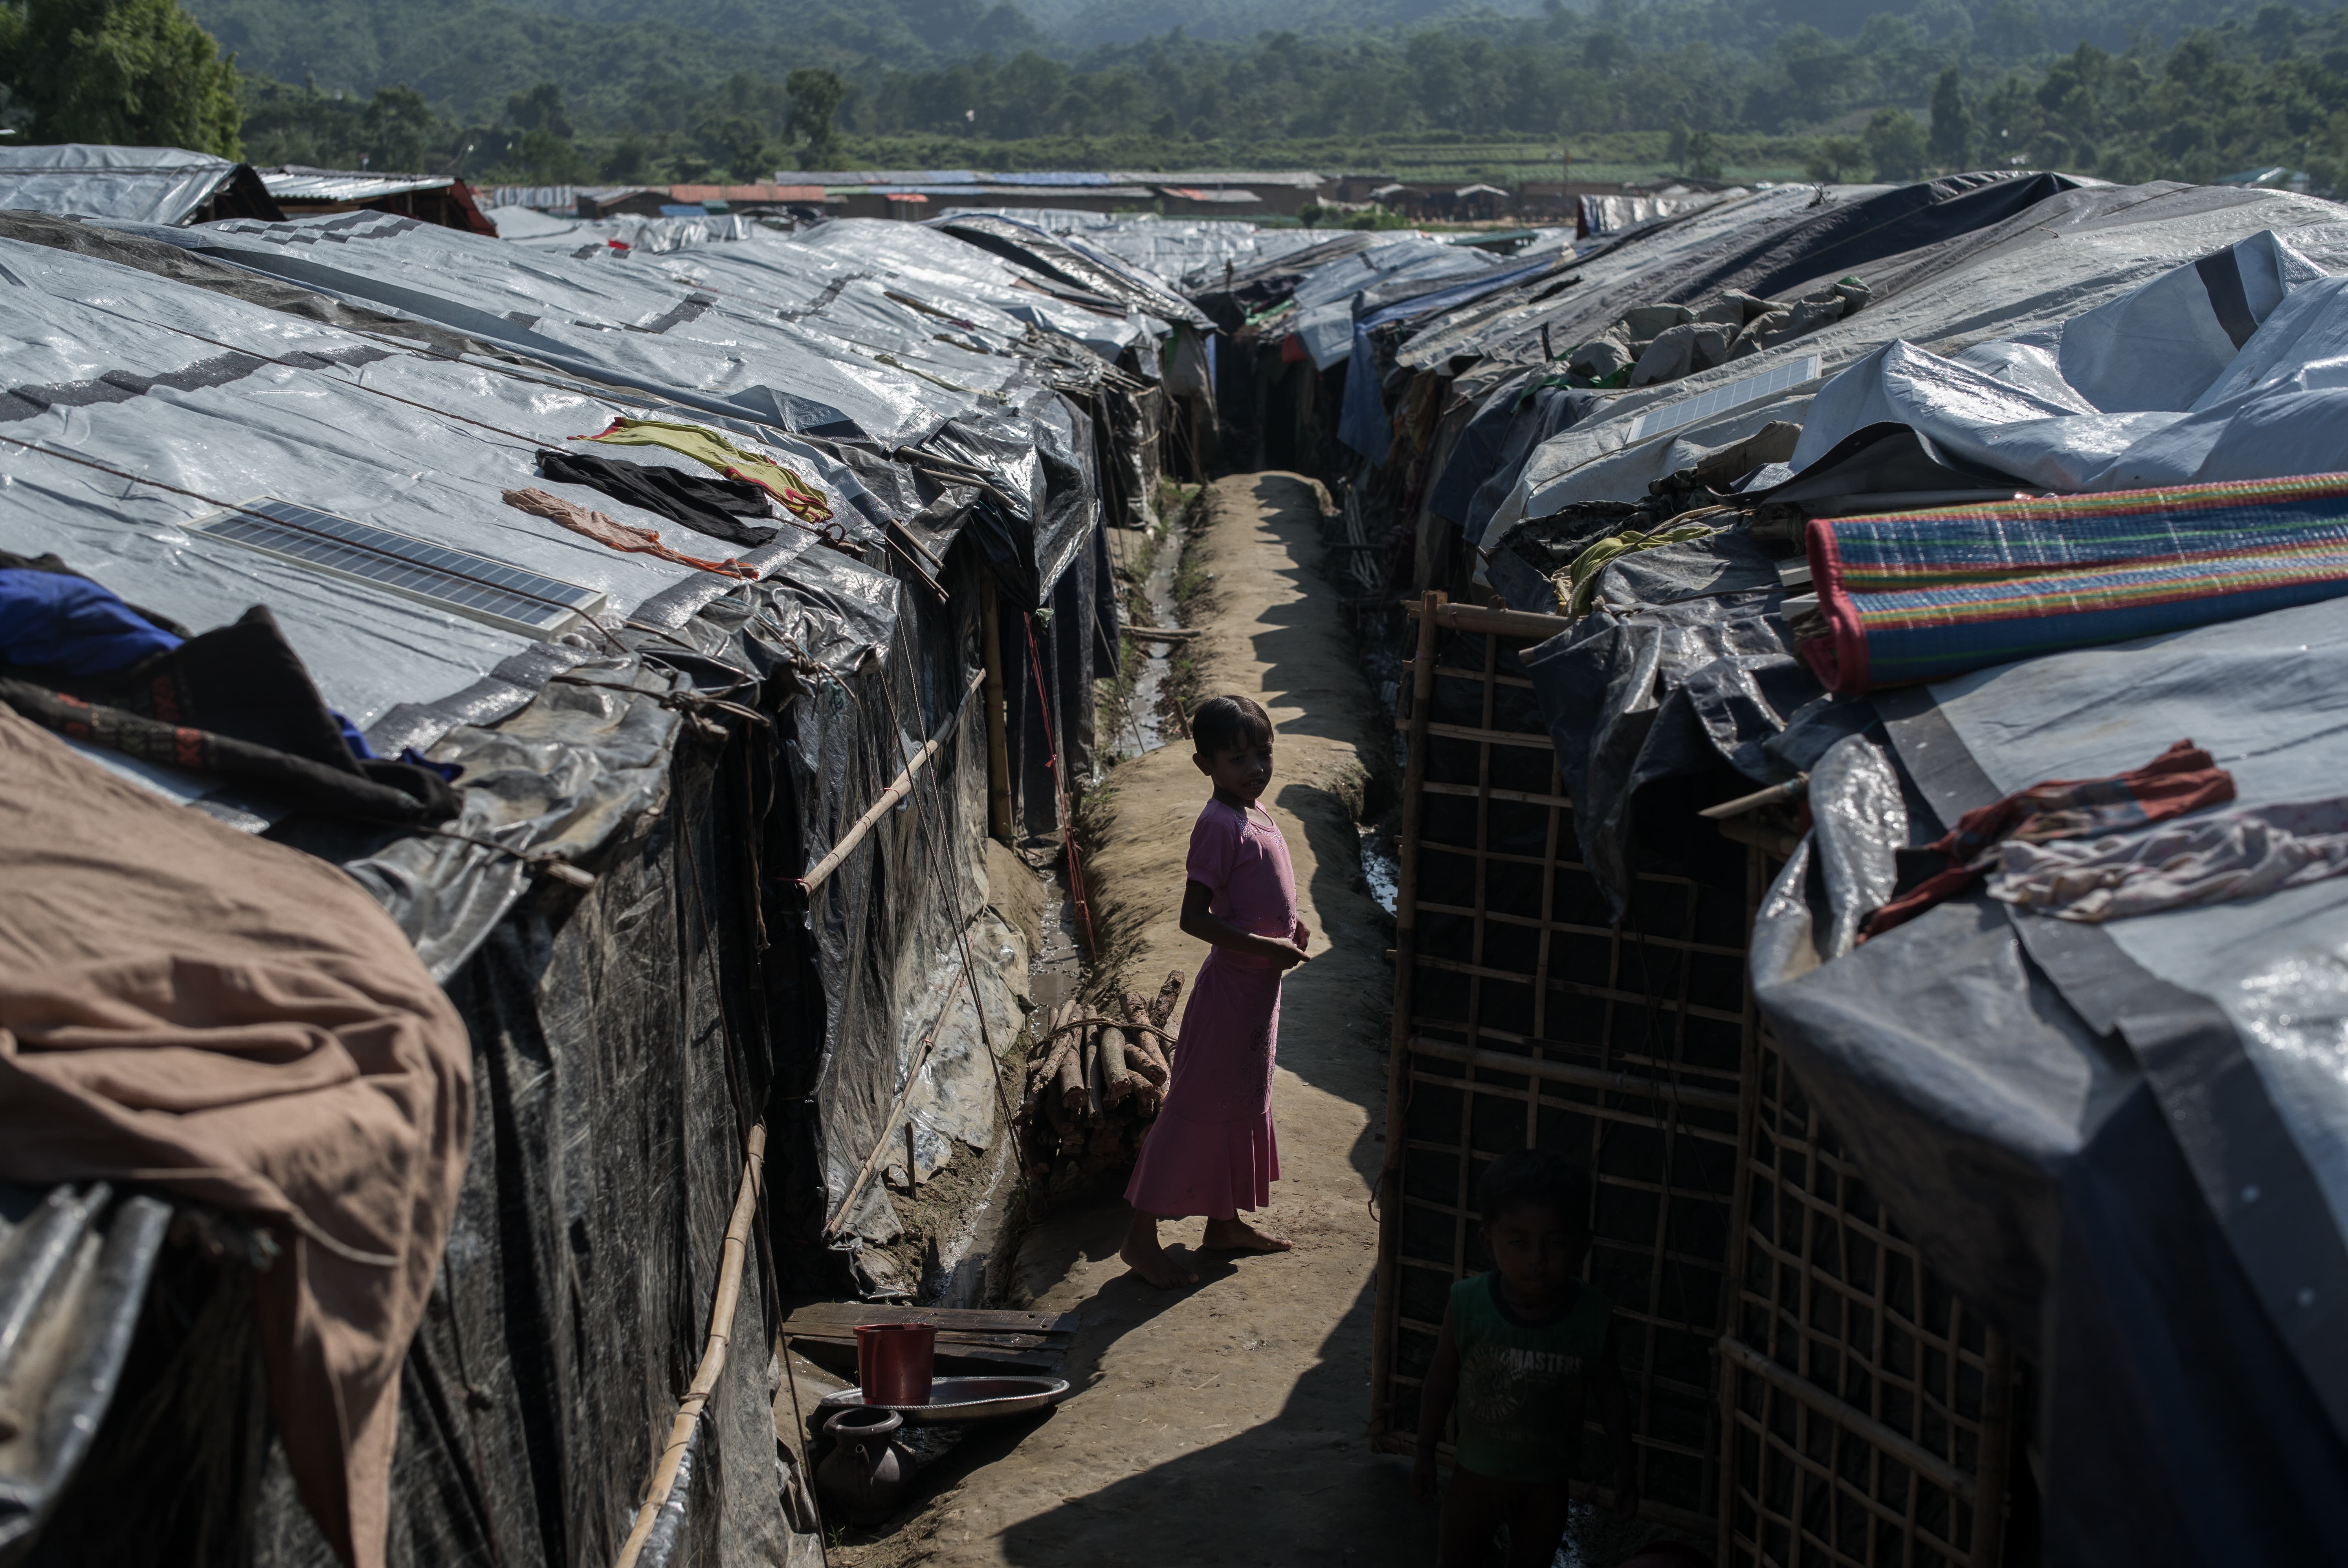 In the Rohingya refugee camps in Bangladesh, there is a large risk of a devastating spread of COVID-19 in the cramped, sprawling sites. While monsoon season is approaching, rains and storms may cause major damage to the camps, further displacements, and cut of access to large parts of the camps. This could also lead to deteriorating hygiene conditions, which would put people at greater risk of infection. (Photo: Ko Chung Ming / Oxfam)